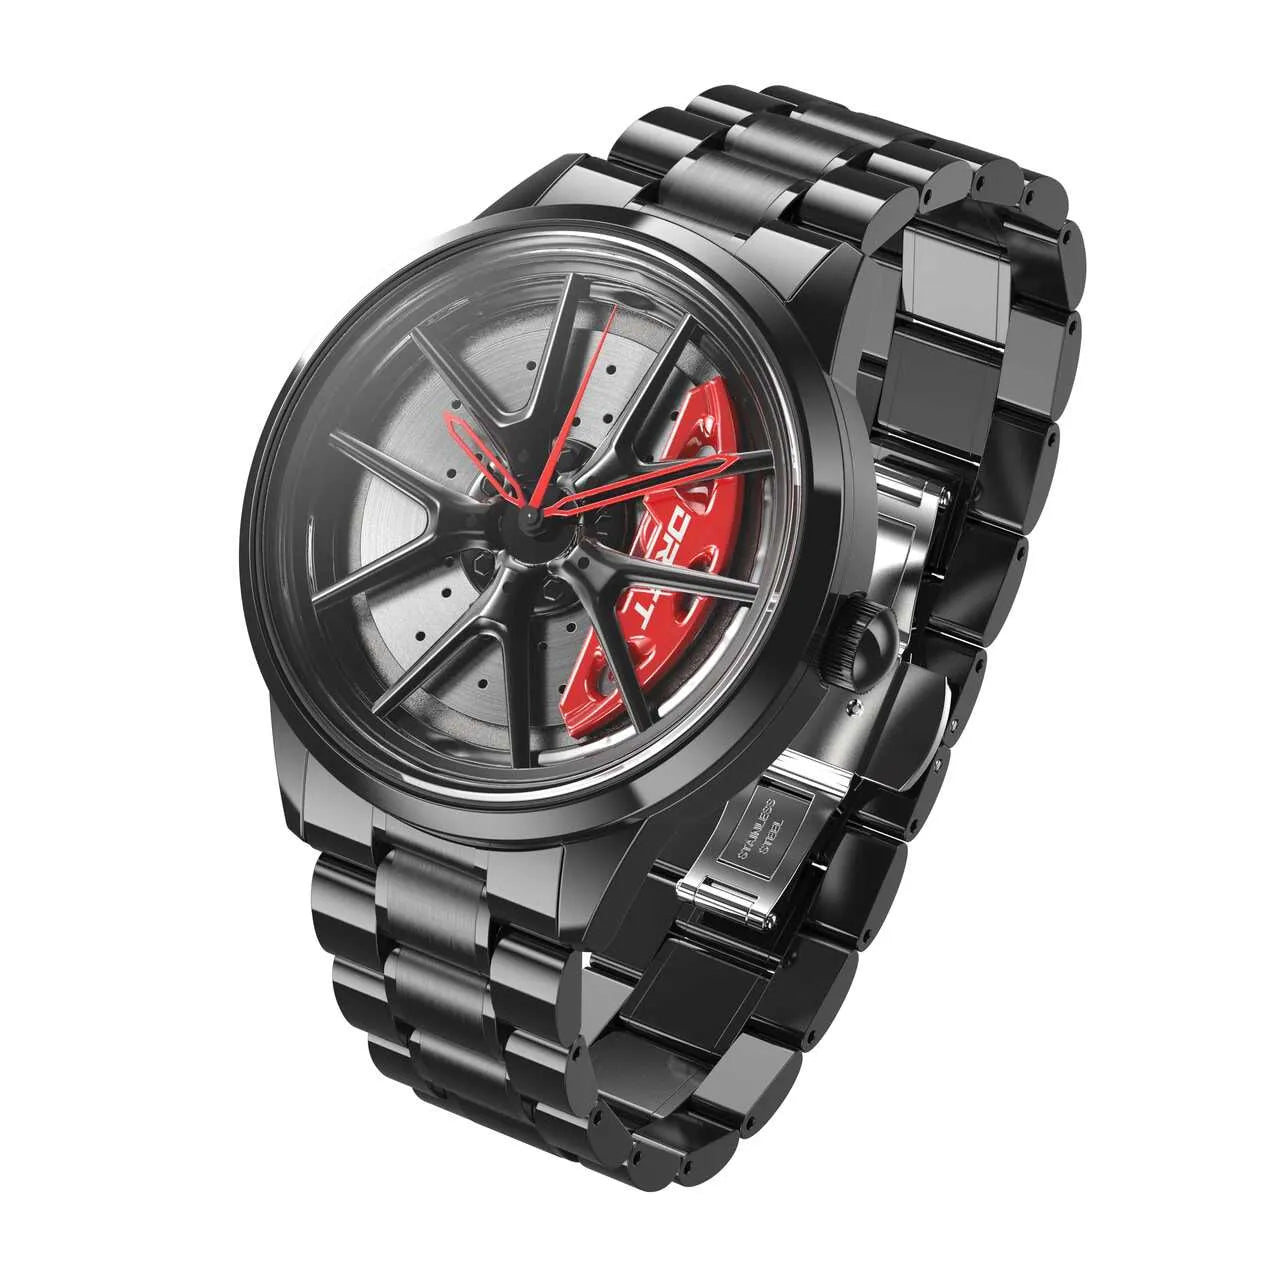 C3H5N3O9 (Nitro) - Experiment ZR012 Black | Time and Watches | The watch  blog